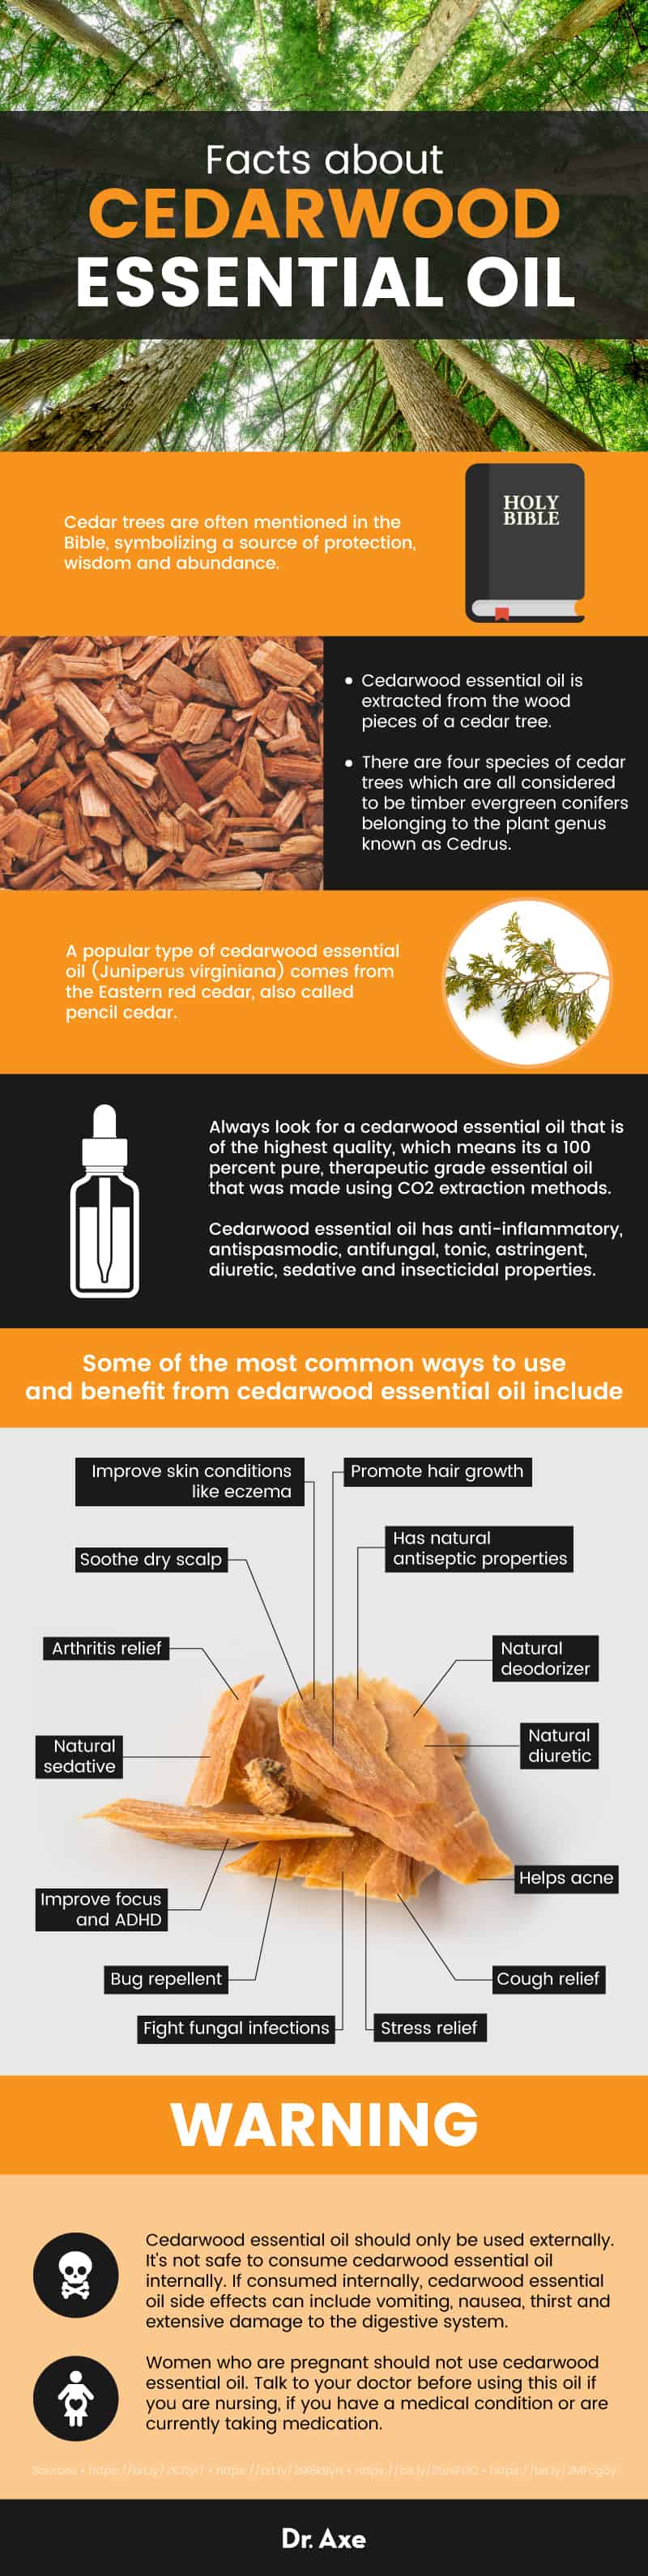 Facts about cedarwood essential oil - Dr. Axe